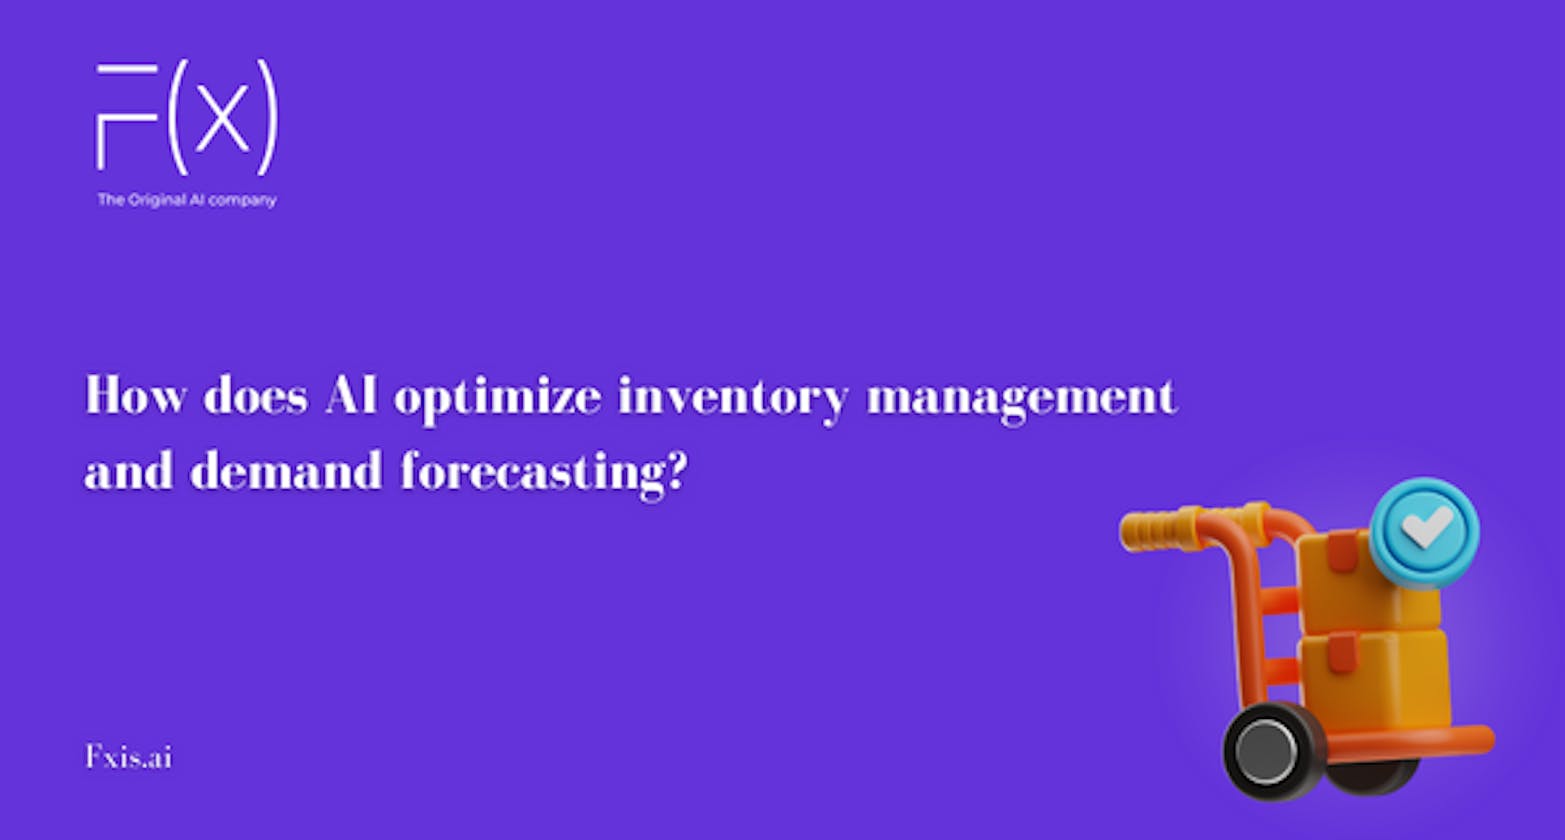 How does AI optimize inventory management and demand forecasting?